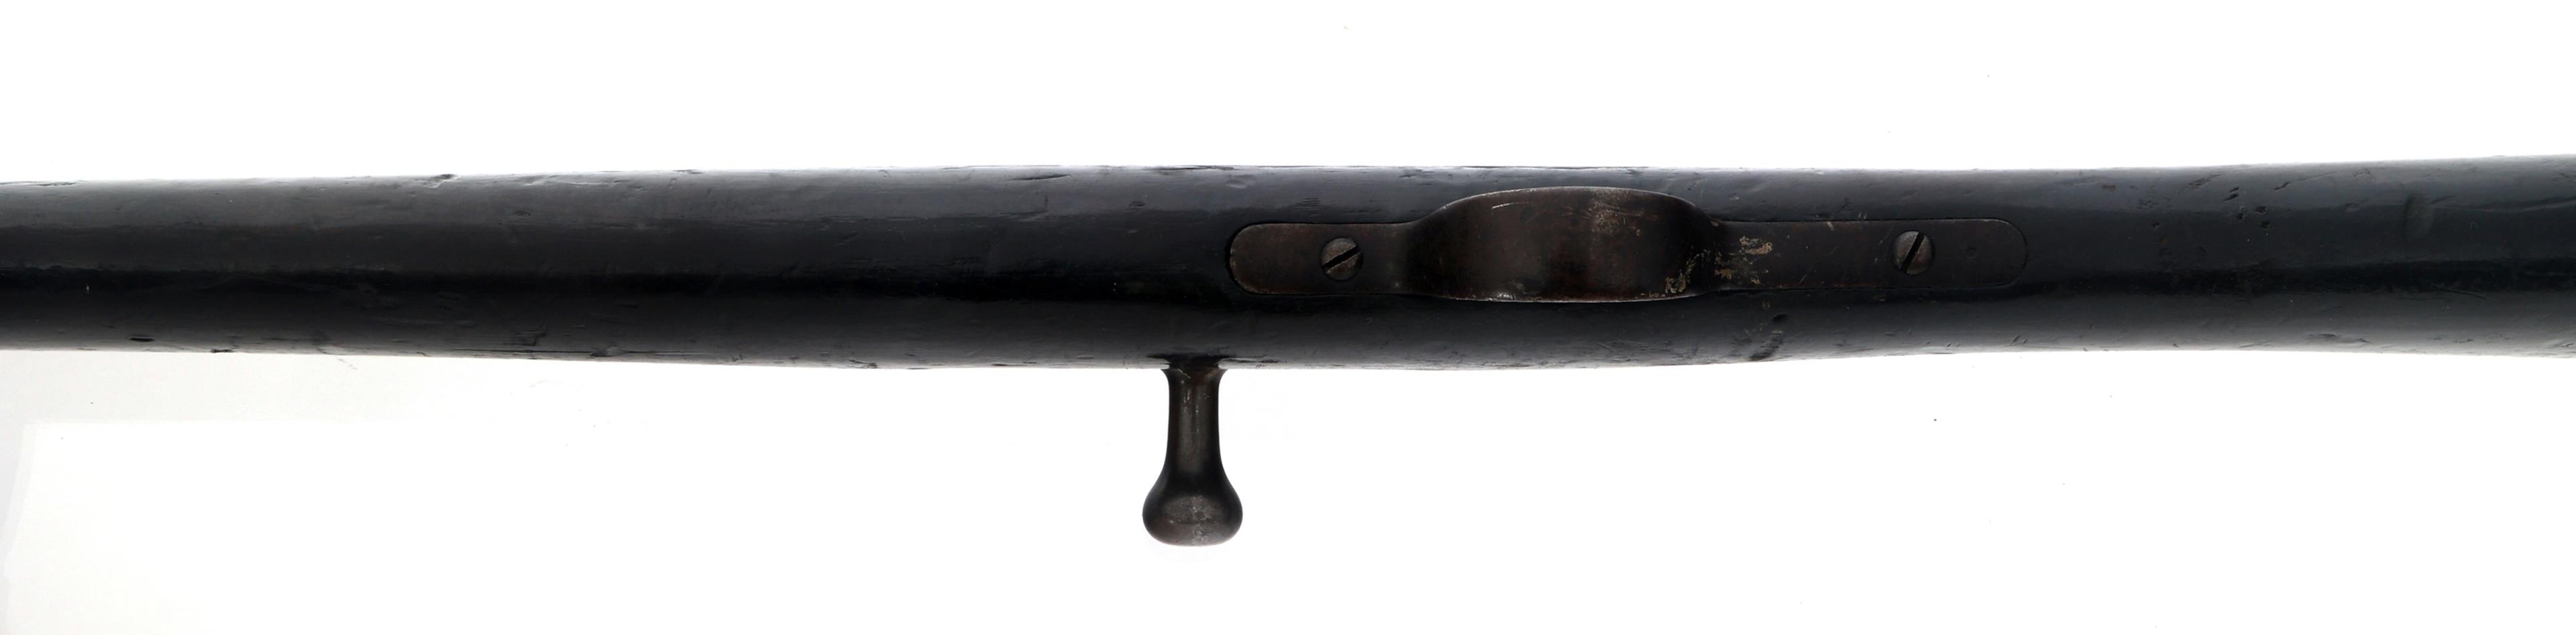 FRENCH CHATELLERAULT MLE 1874 M80 8x50mm CAL RIFLE